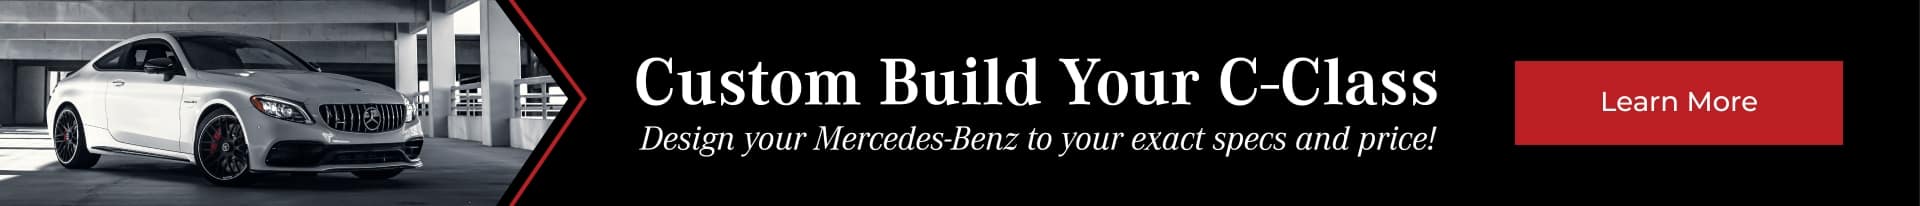 Custom Build Your C-Class - Design your Mercedes-Benz to your exact specs and price!